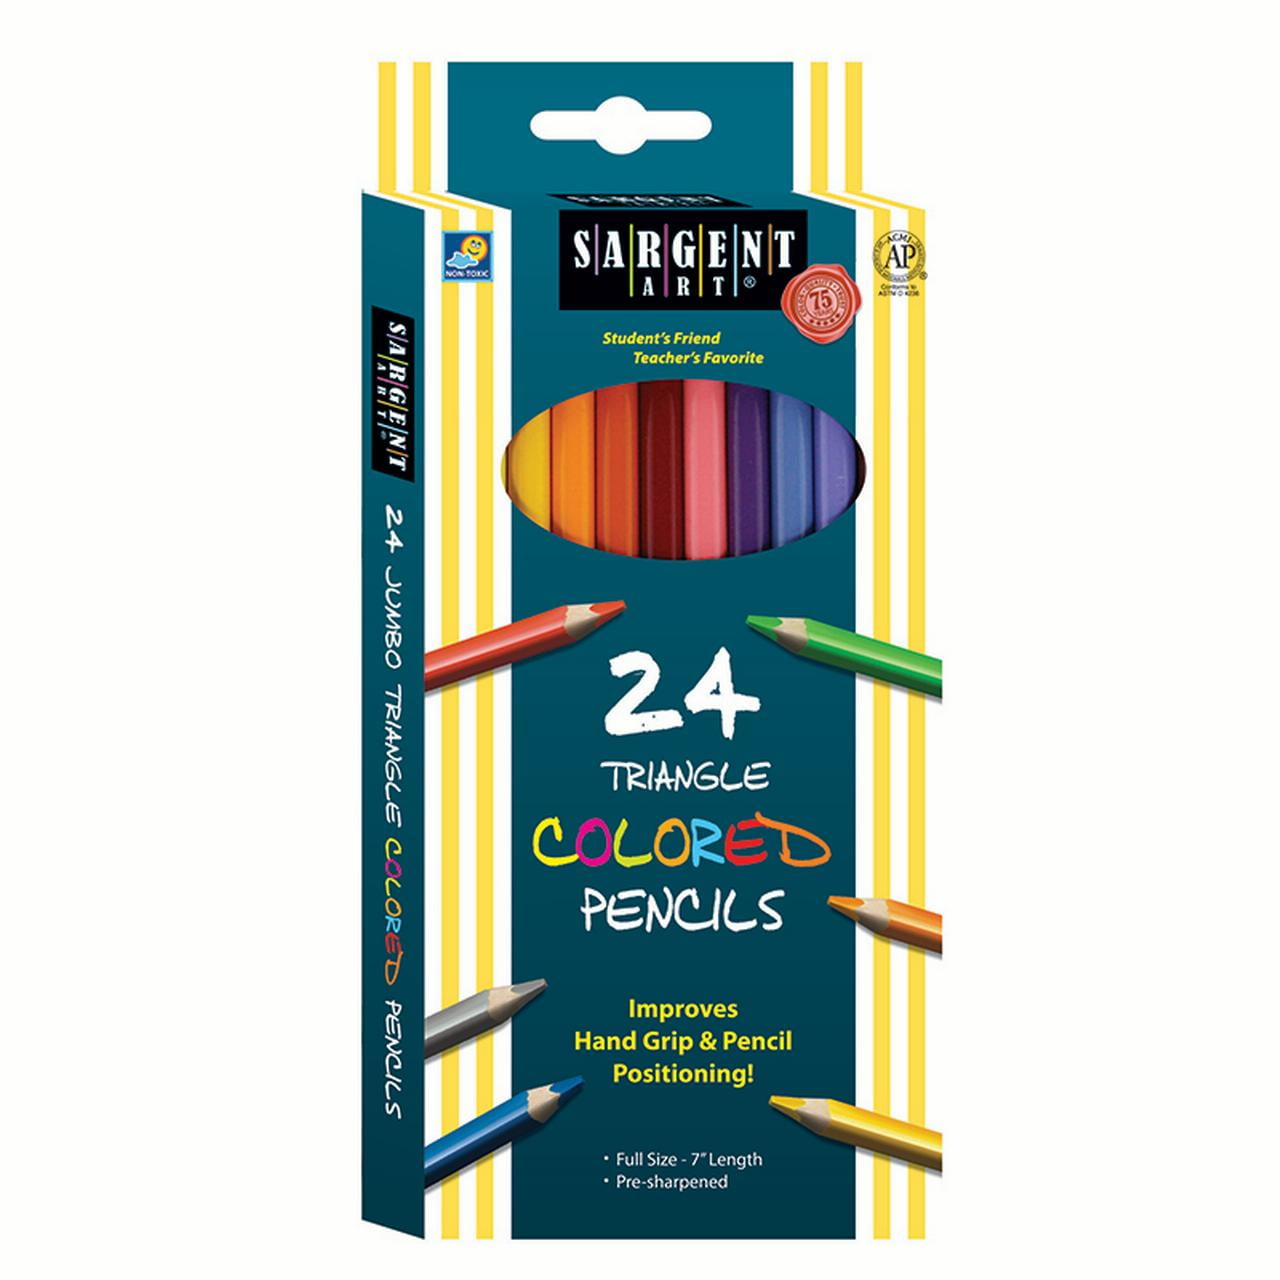 Sargent Art Jumbo Triangle Colored Pencils Assorted Colors 10